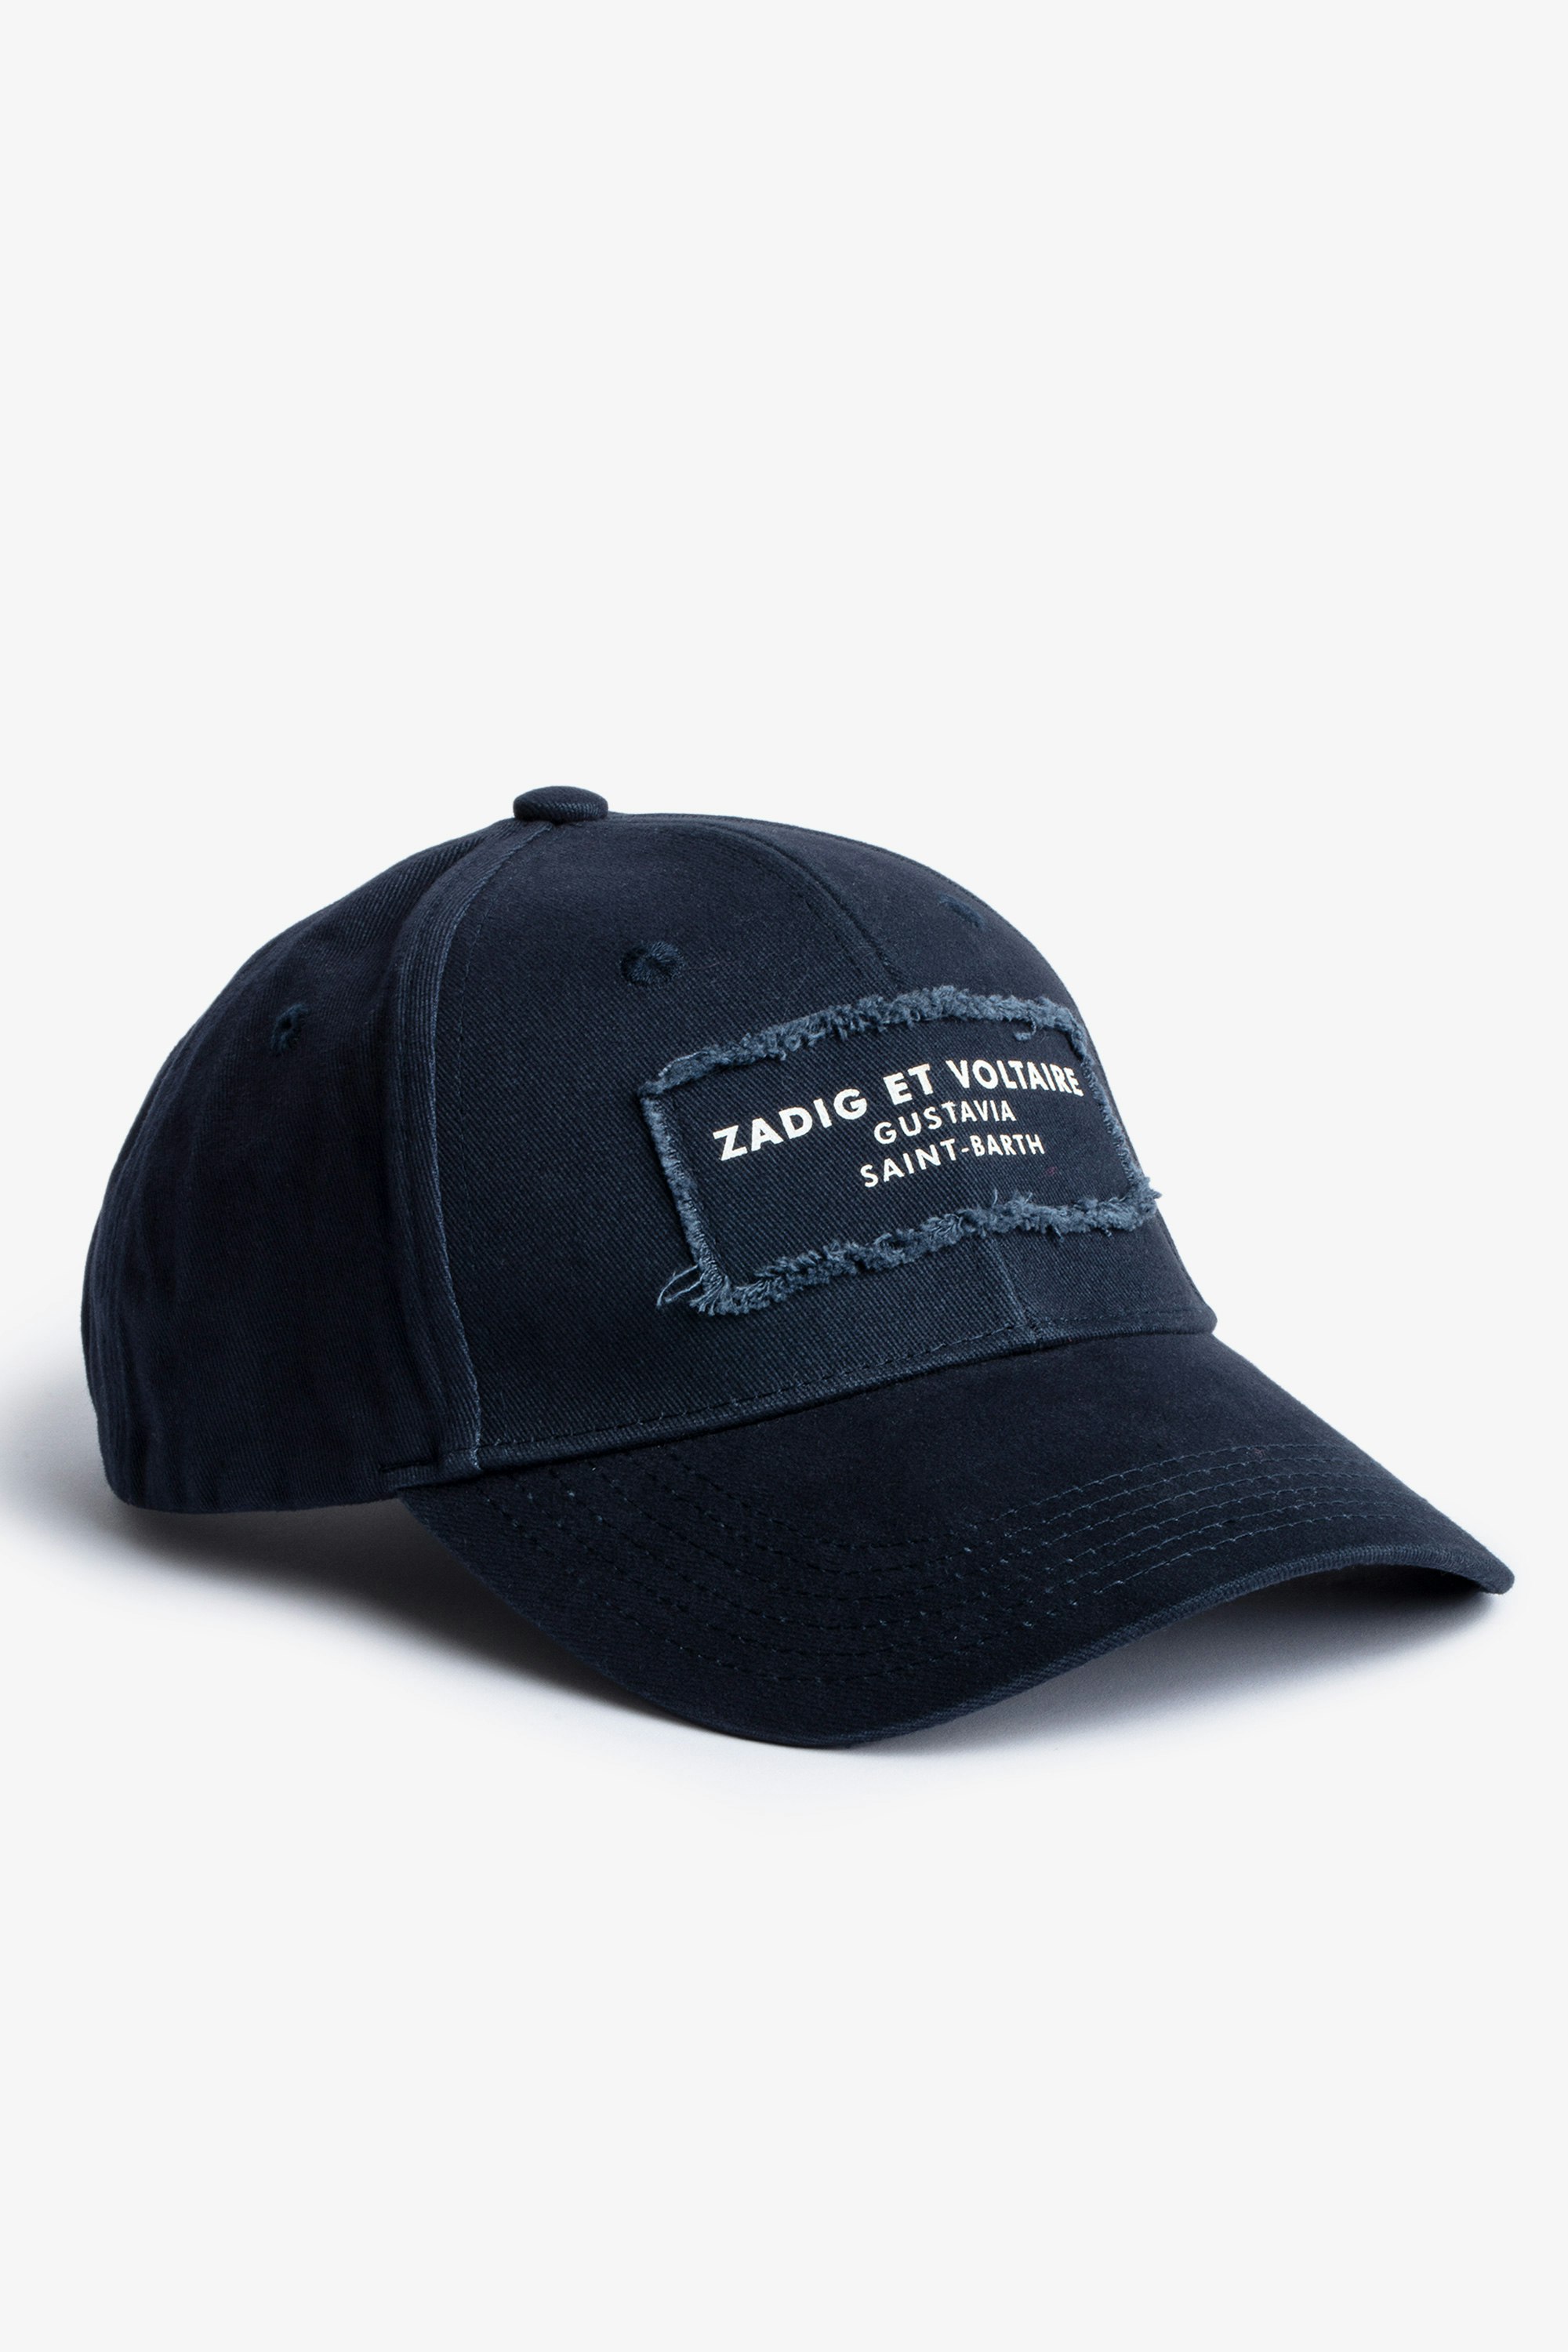 Klelia St Barts Cap Navy blue cotton cap with St Barts embroidery 